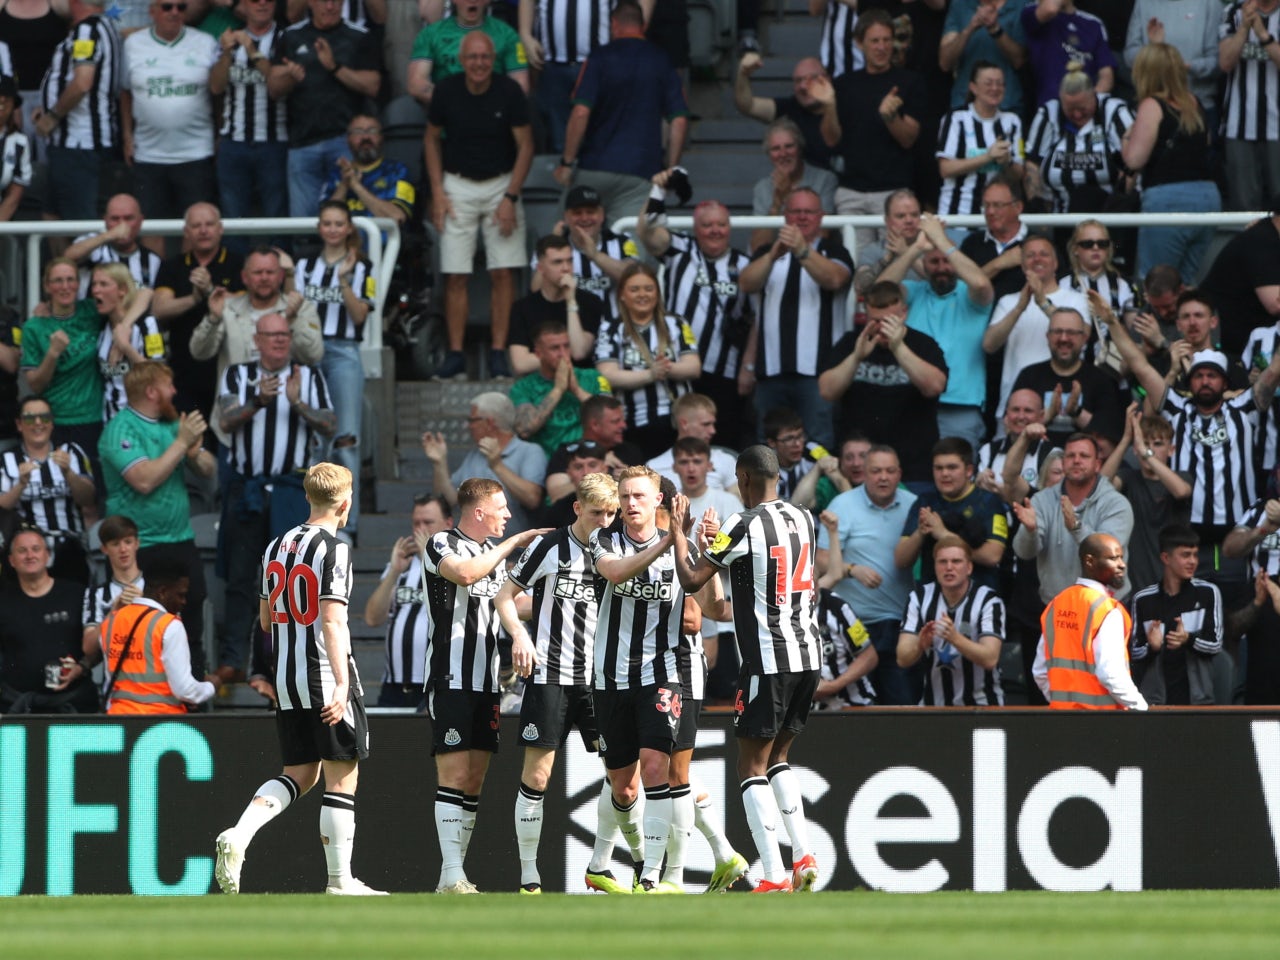 Two key Newcastle United players emerge as injury doubts for Manchester United trip